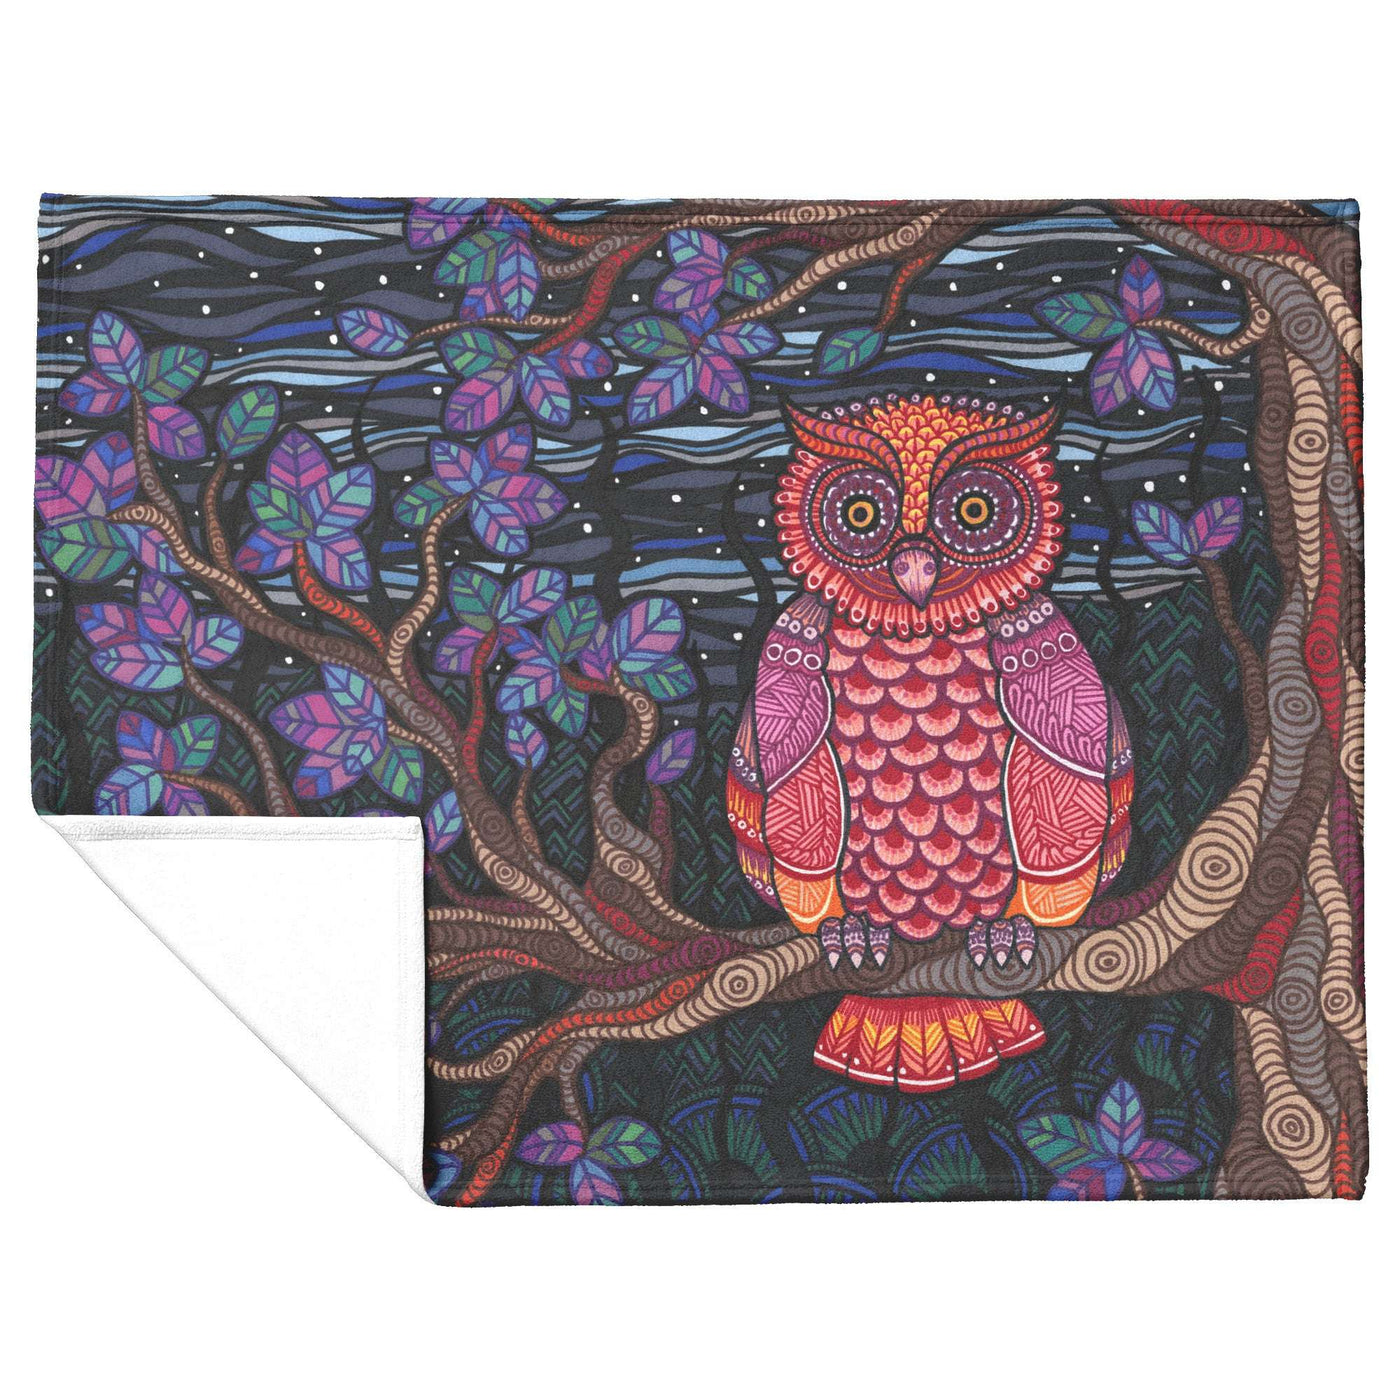 Colorful illustrated Owl Tree Blanket sitting on a branch against a night sky backdrop, depicted on a folded blanket with intricate patterns.